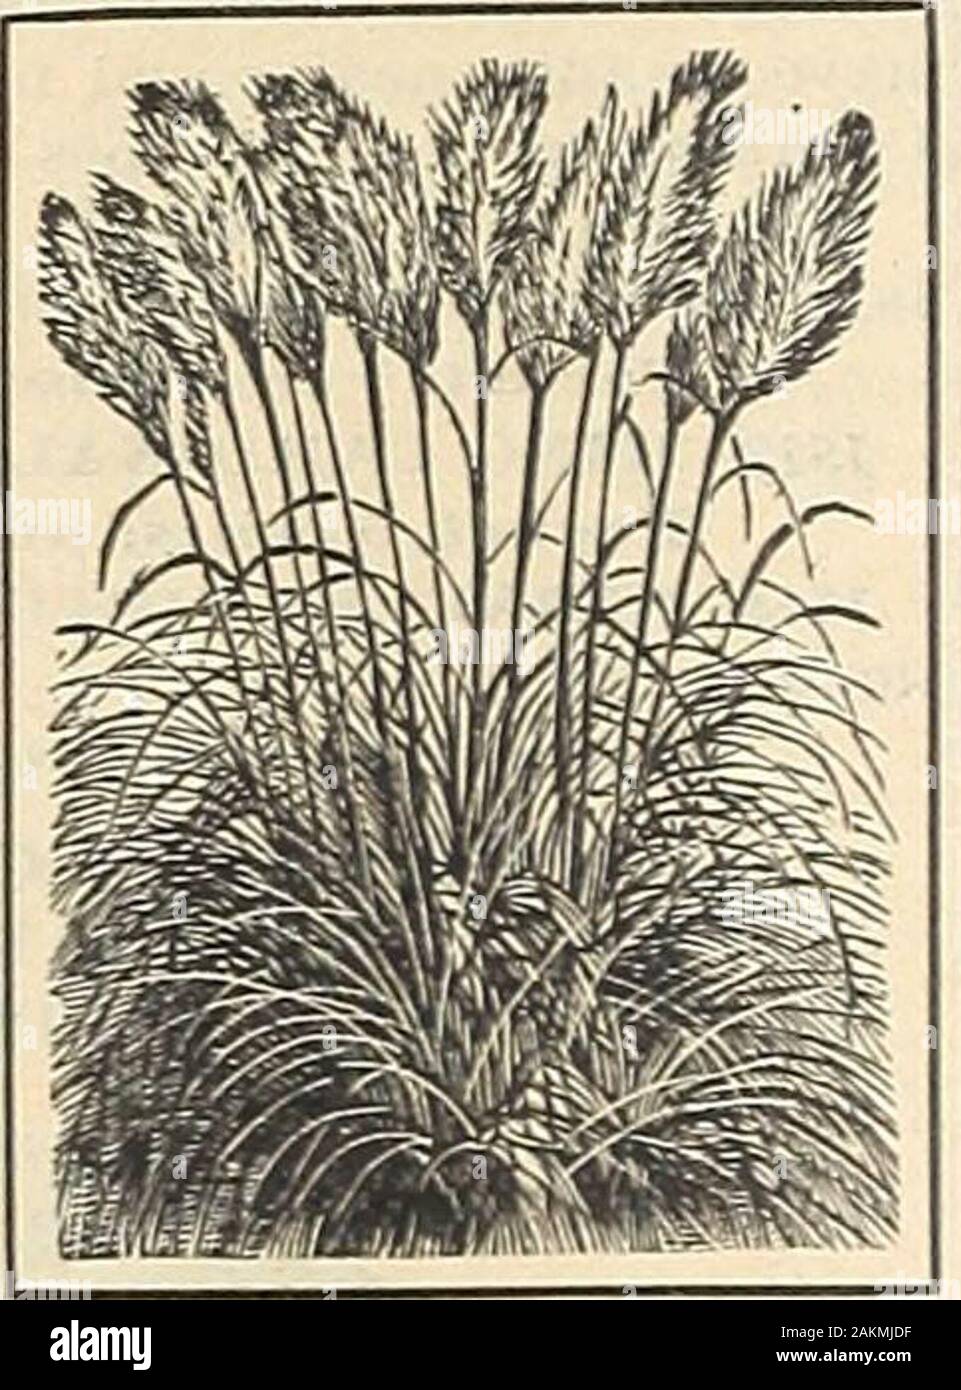 The Maule seed book : 1917 . te are much used inwinter bouquets. We oflTer a mixture of grasses embracing Pampas,Cloud, Reed, Quaking, Squirrel Tall, Zebra, Feather and other choiceornamental sorts. Packet, 10 cents. OXALIS Tender Perennial 1583 MIXED. Beautiful, bright littleplants, with attractive leaves and flowers.Half trailing in habit. Suitable for hang-ing baskets, vases and edgings. Pink, yel-low and white. Packet, 10 cents. PAMPAS GRASS Half Hardy Perennial 1584 Tall growing and very stately.Native of South America. One of themost eflectlve ornamental grasses. Itssilvery white plumes Stock Photo